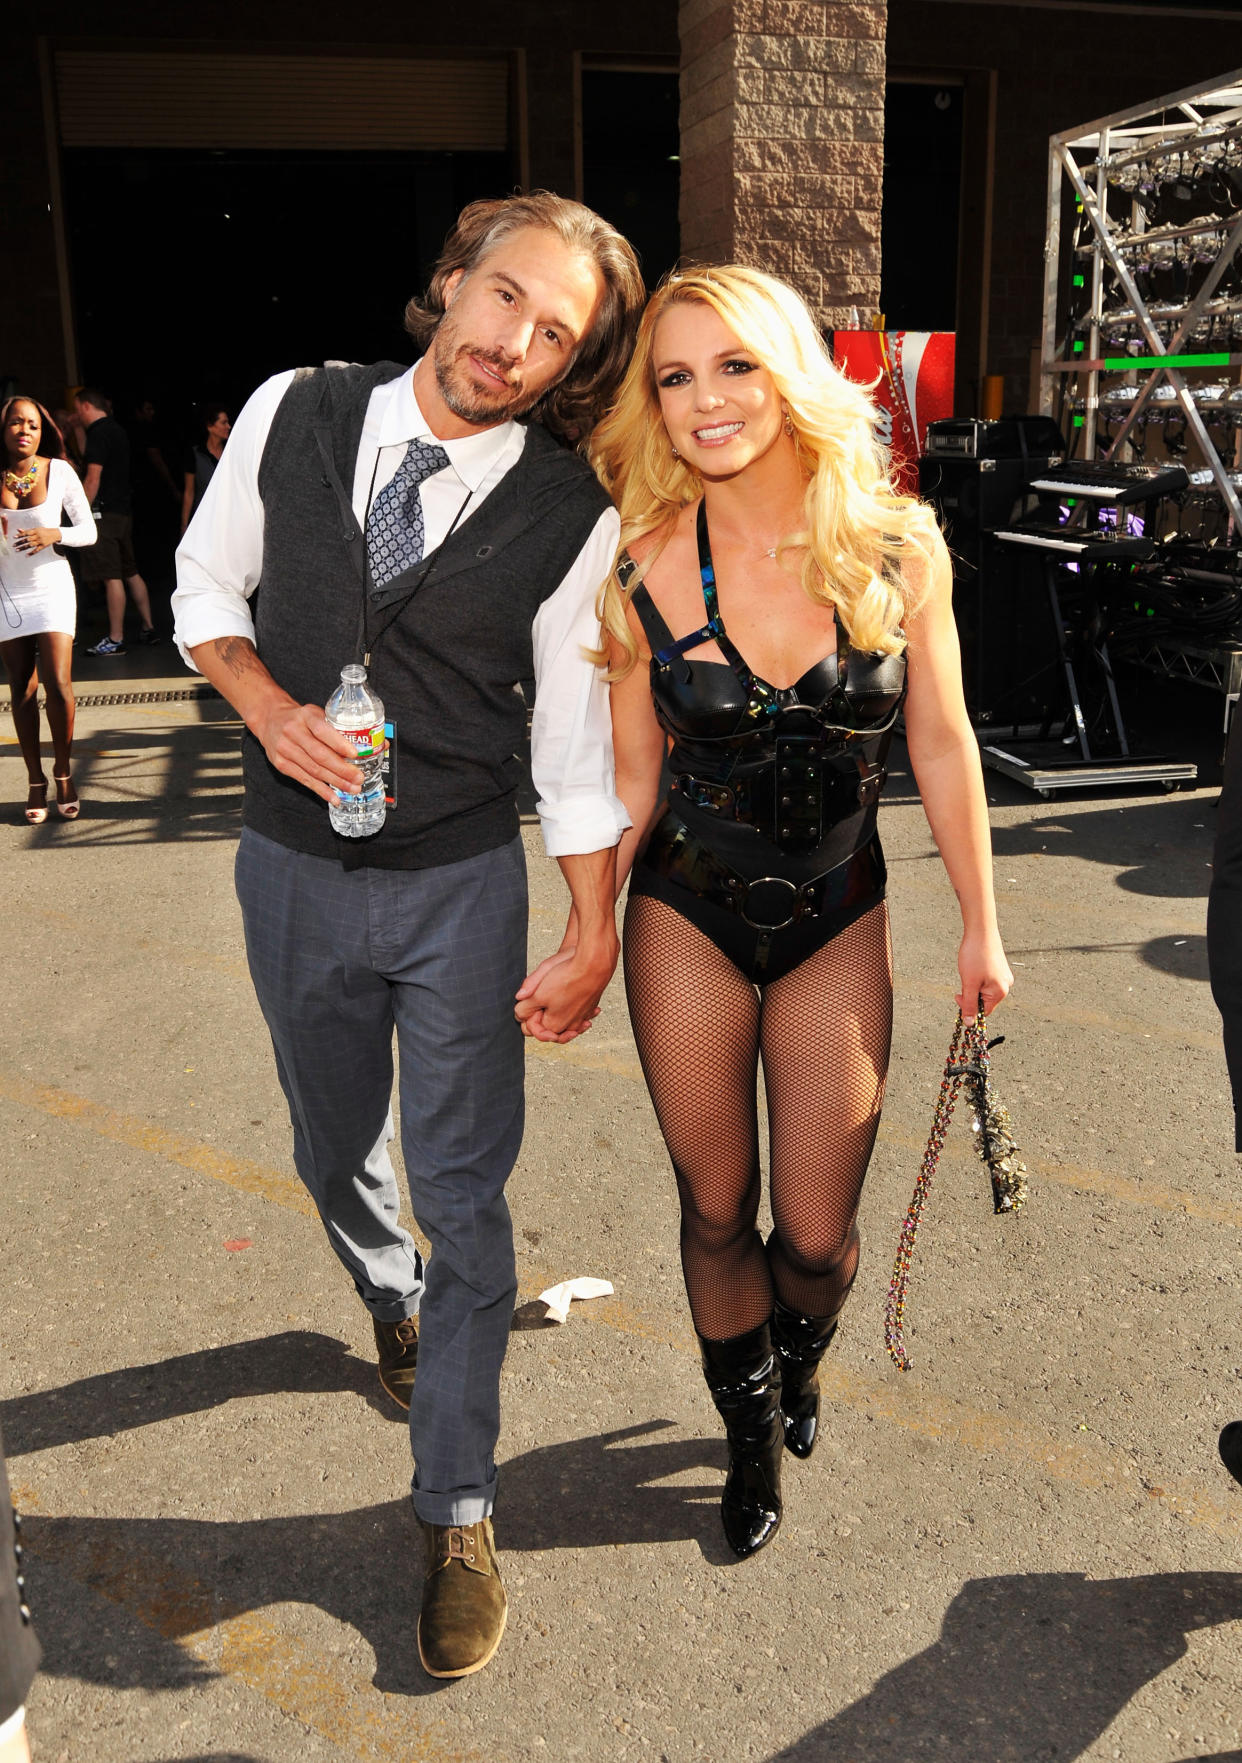 Jason Trawick (L) and singer Britney Spears pose backstage during the 2011 Billboard Music Awards at the MGM Grand Garden Arena May 22, 2011 in Las Vegas, Nevada.